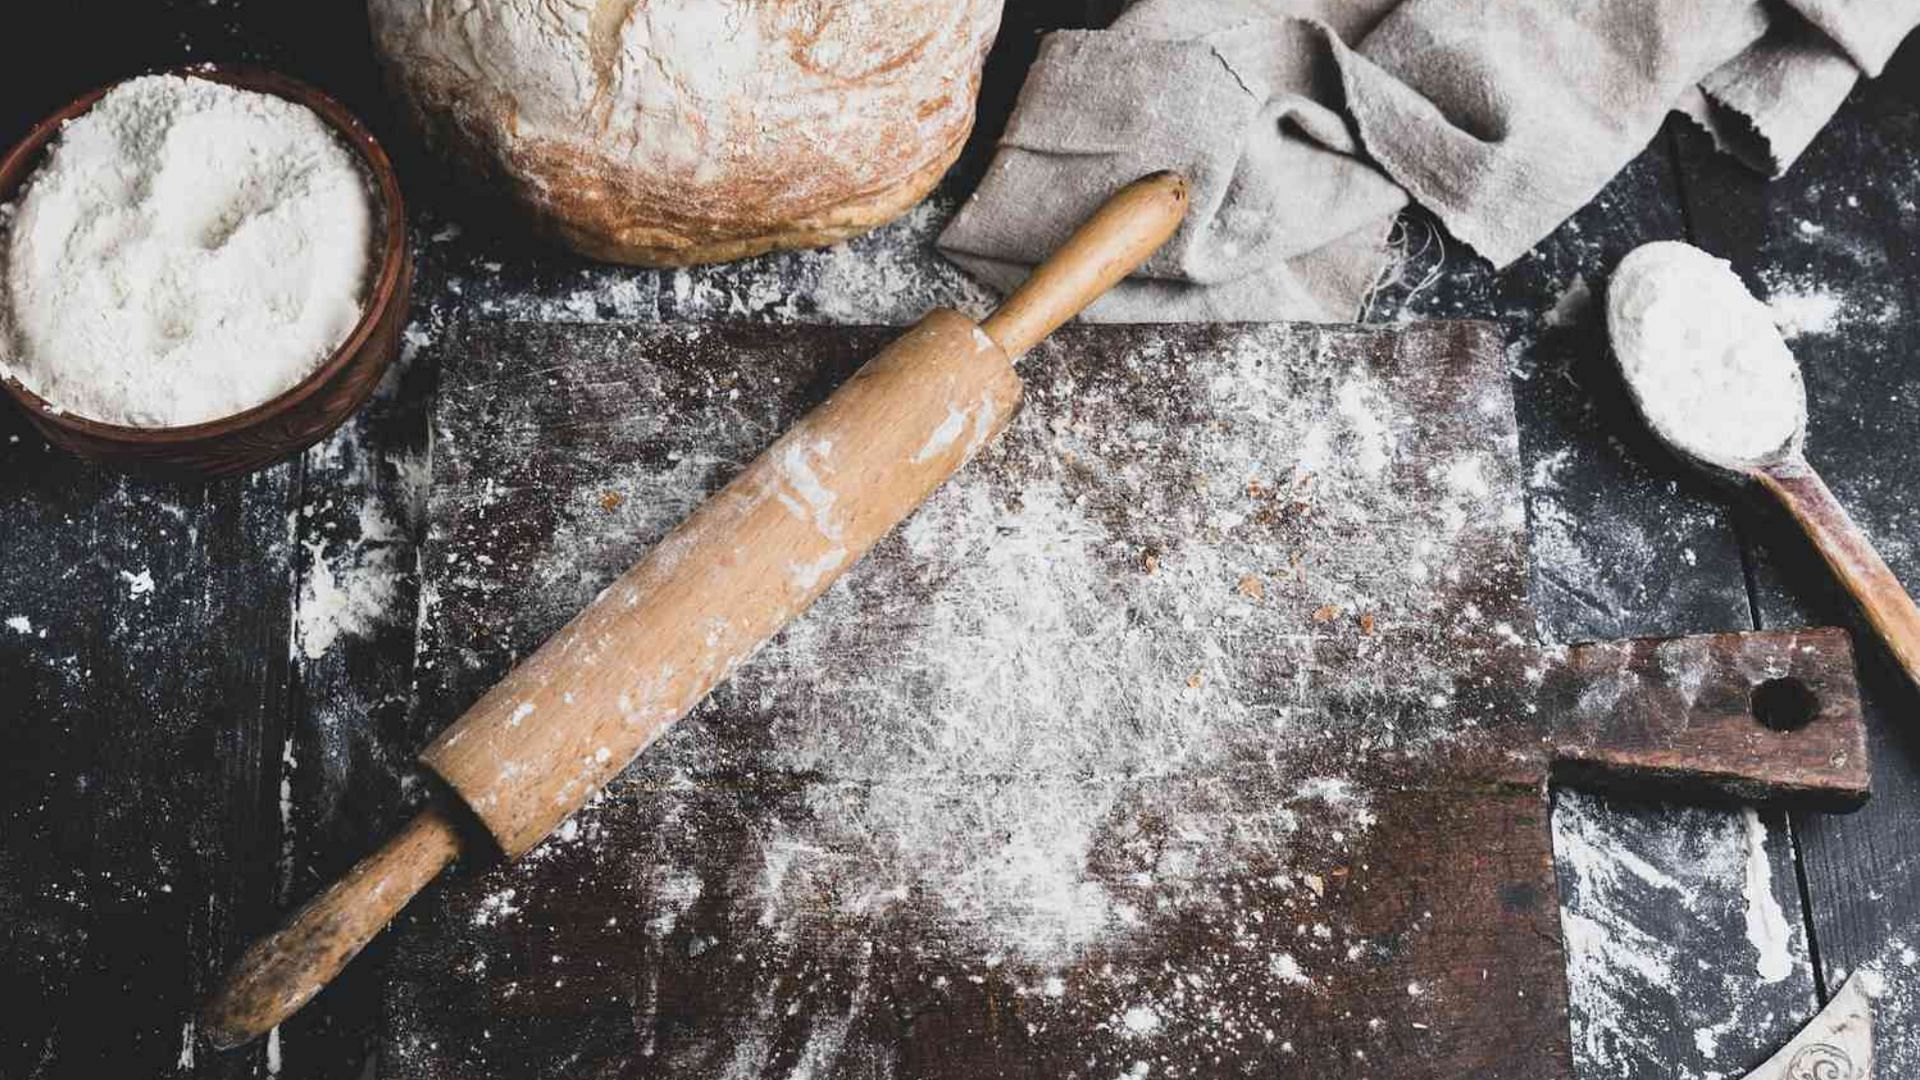 the consumption of raw flour is linked to the salmonella outbreak in over 11 states (Image via Natalya Danko / EyeEm / Getty Images)